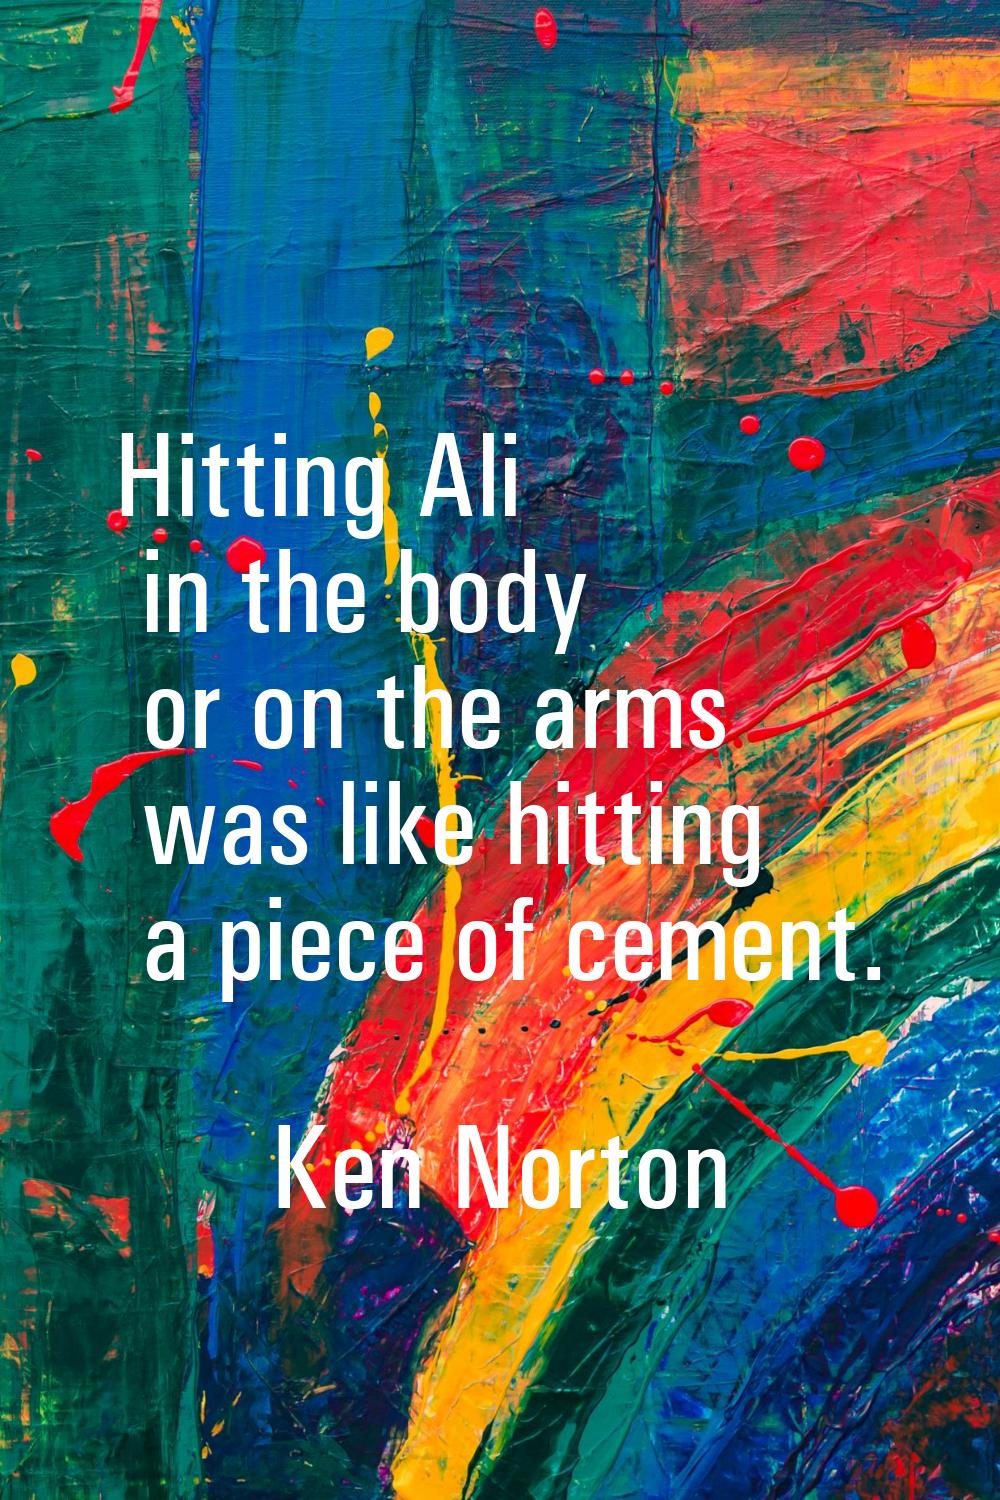 Hitting Ali in the body or on the arms was like hitting a piece of cement.